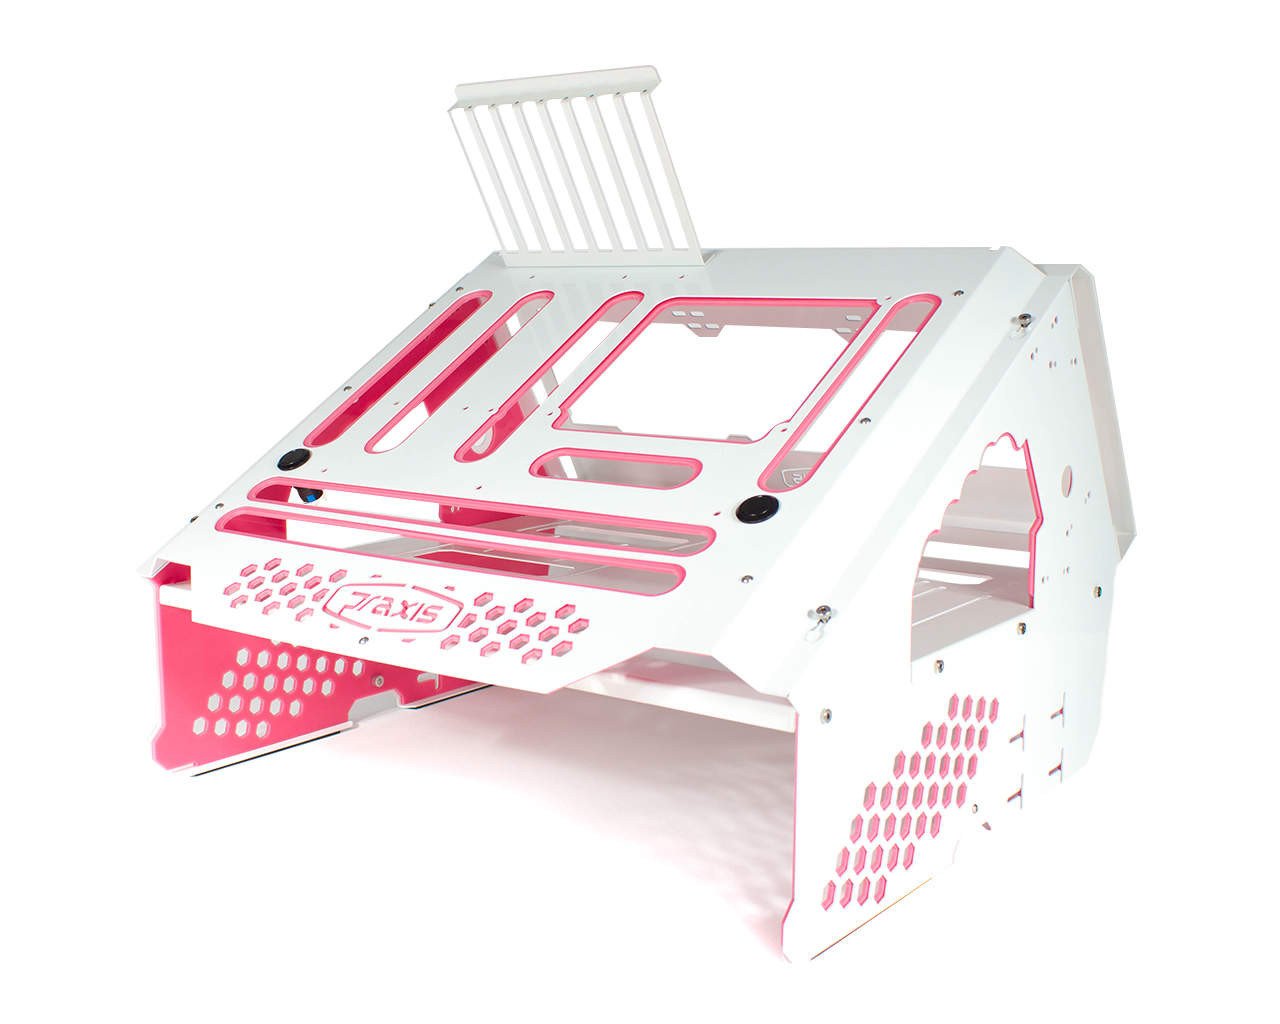 PrimoChill's Praxis Wetbench Powdercoated Steel Modular Open Air Computer Test Bench for Watercooling or Air Cooled Components - PrimoChill - KEEPING IT COOL White w/Solid Light Pink Accents